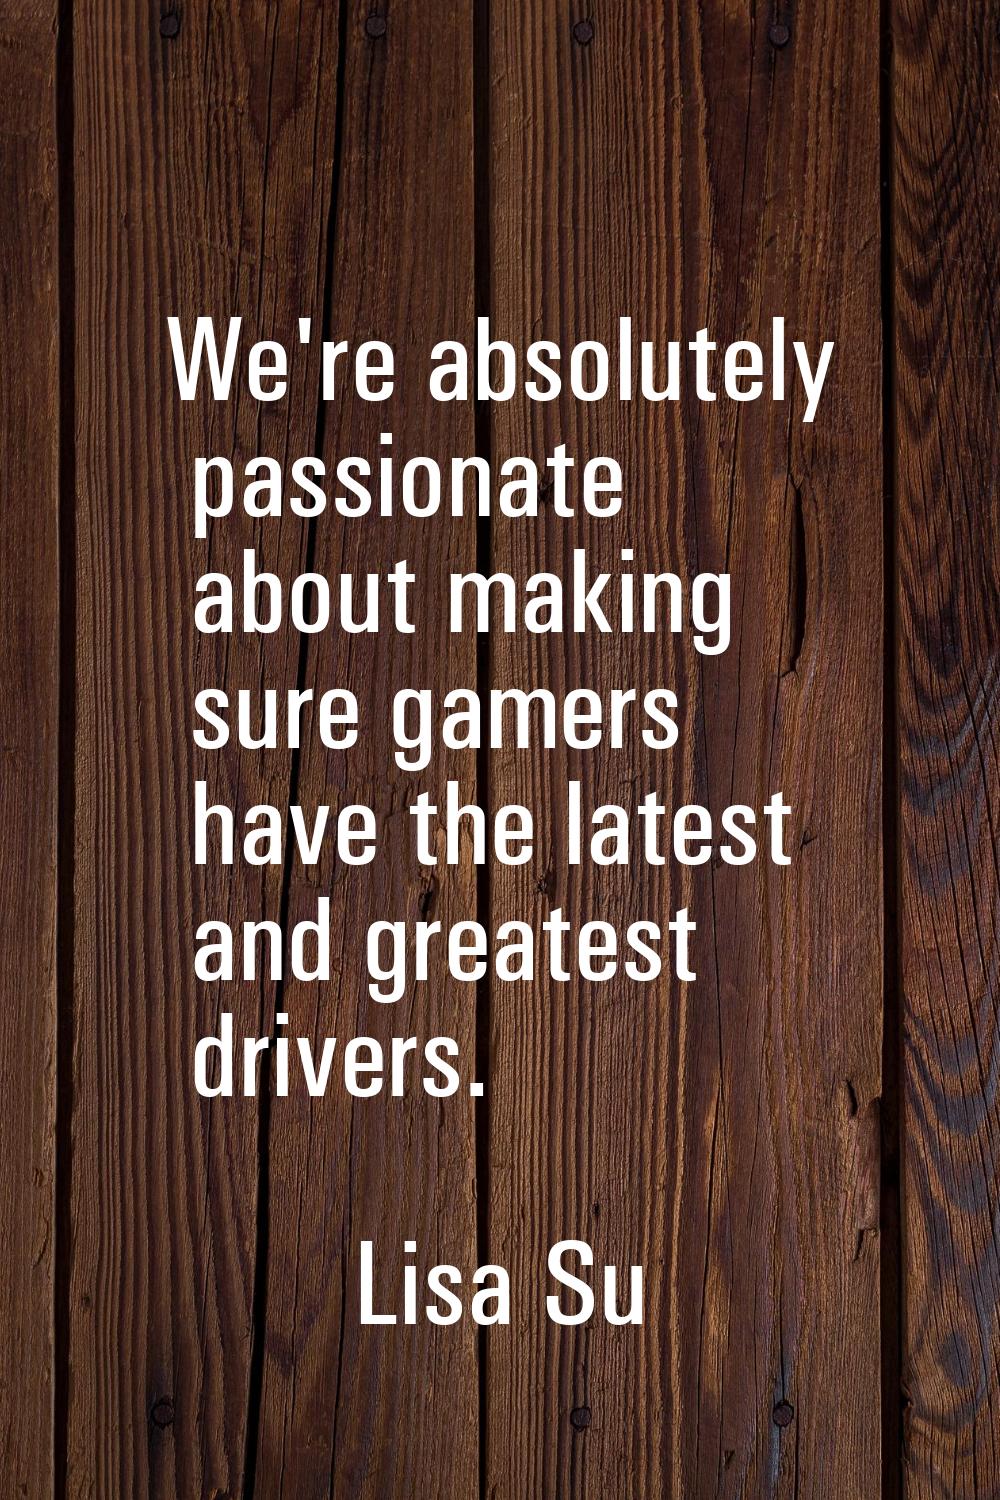 We're absolutely passionate about making sure gamers have the latest and greatest drivers.